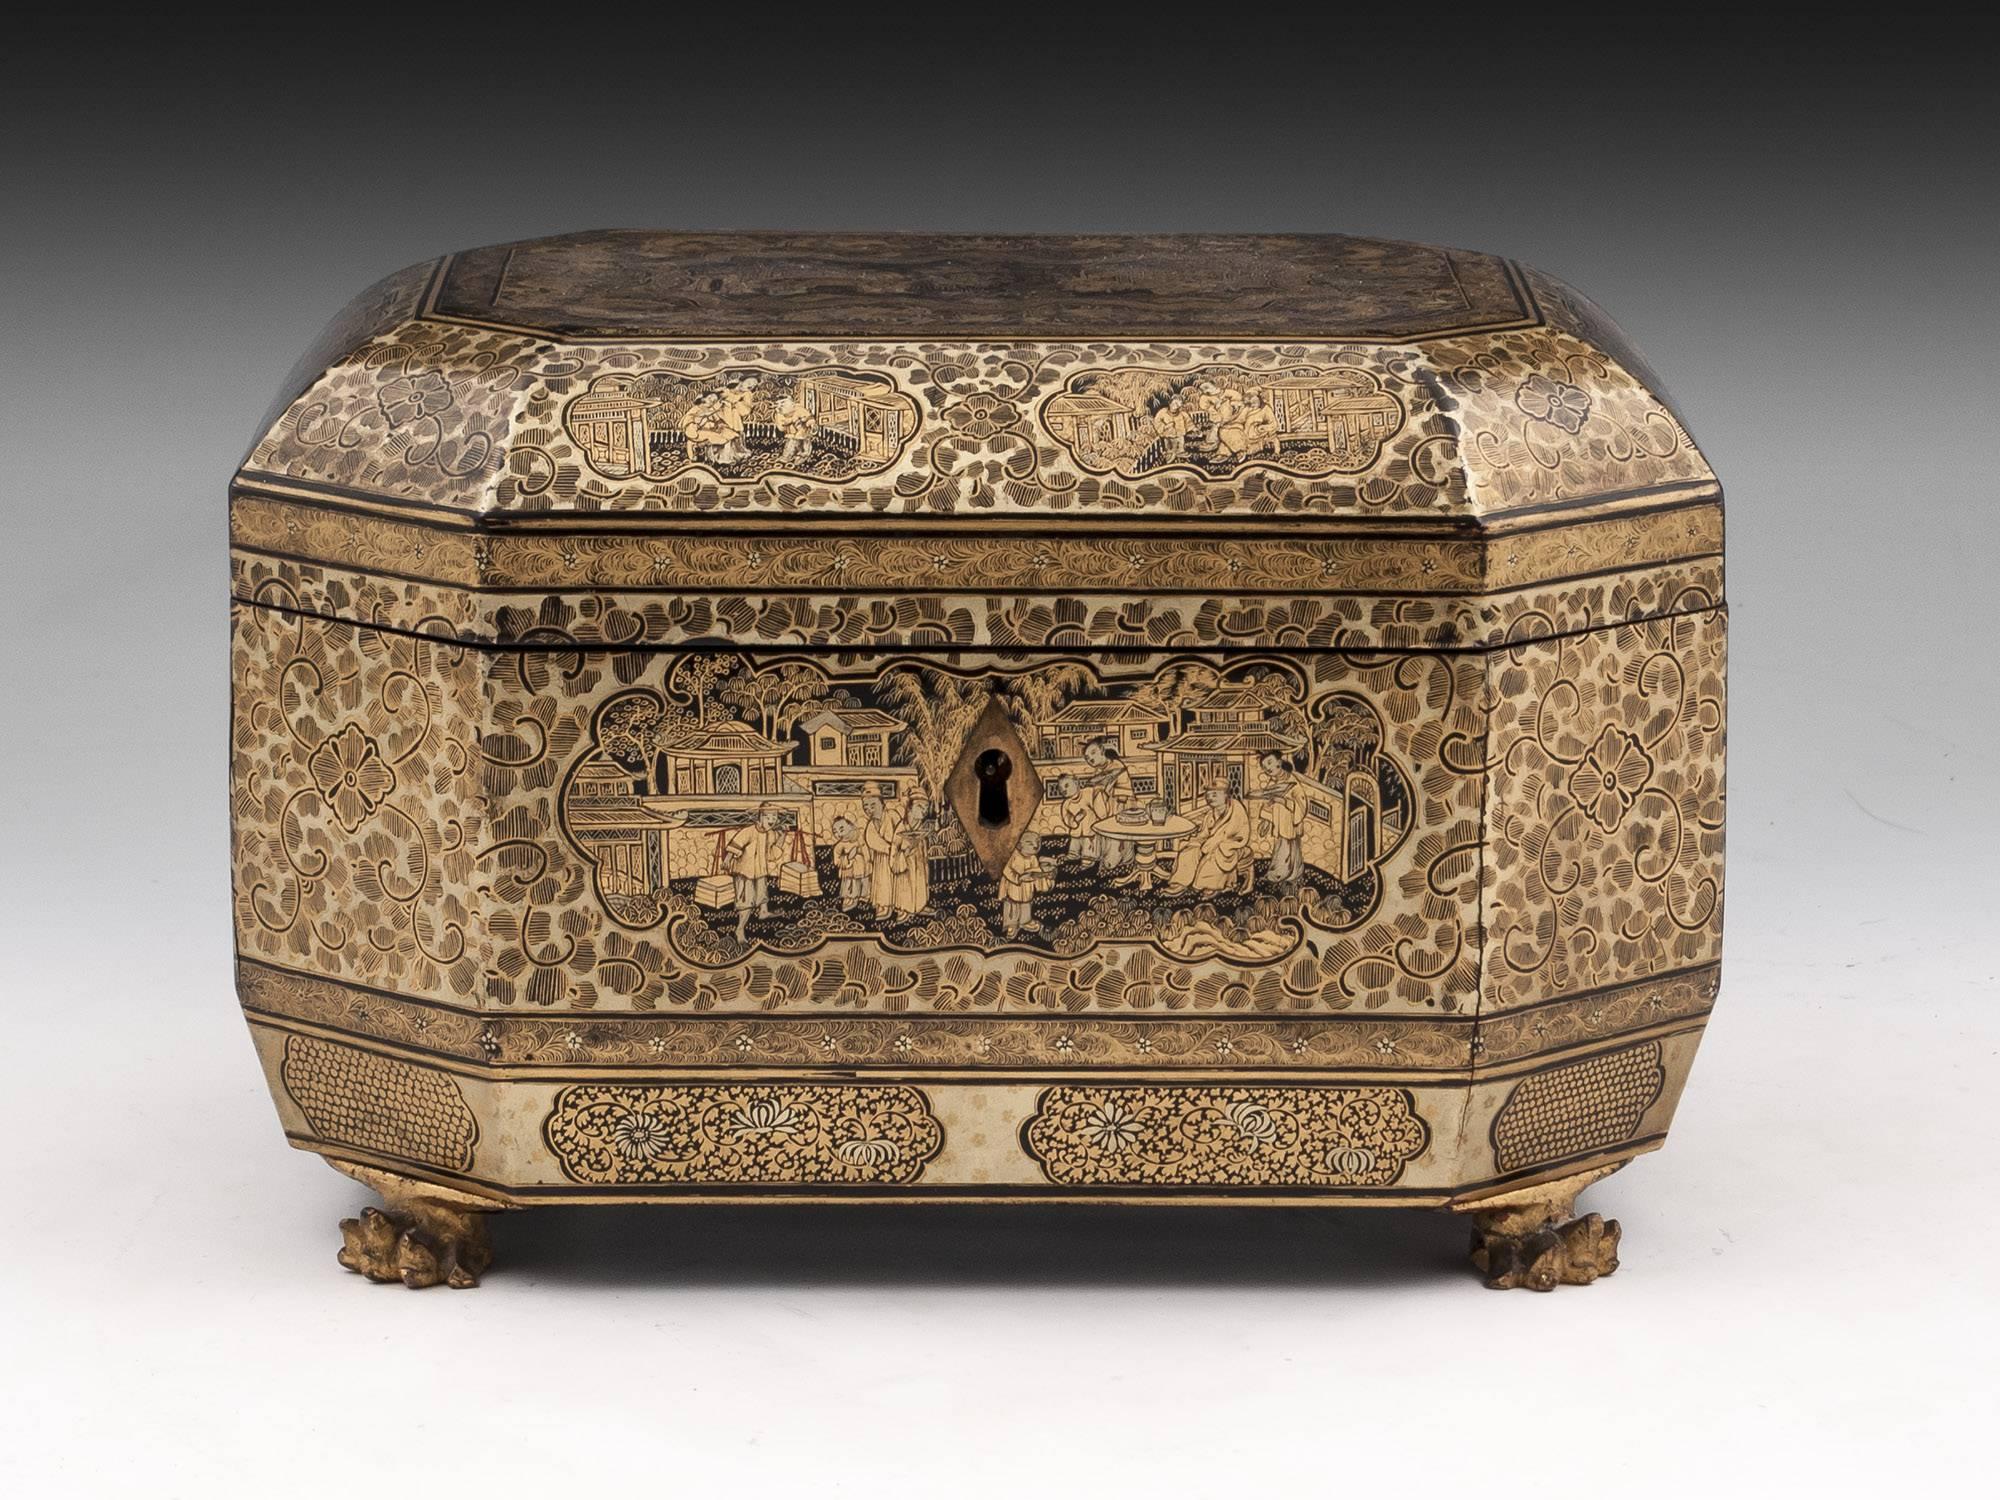 Chinese lacquer tea chest standing on four carved dragons feet, decorated with beautiful very detailed chinoiserie panels.

The Chinese tea caddy has a fully working lock and tasselled Key.